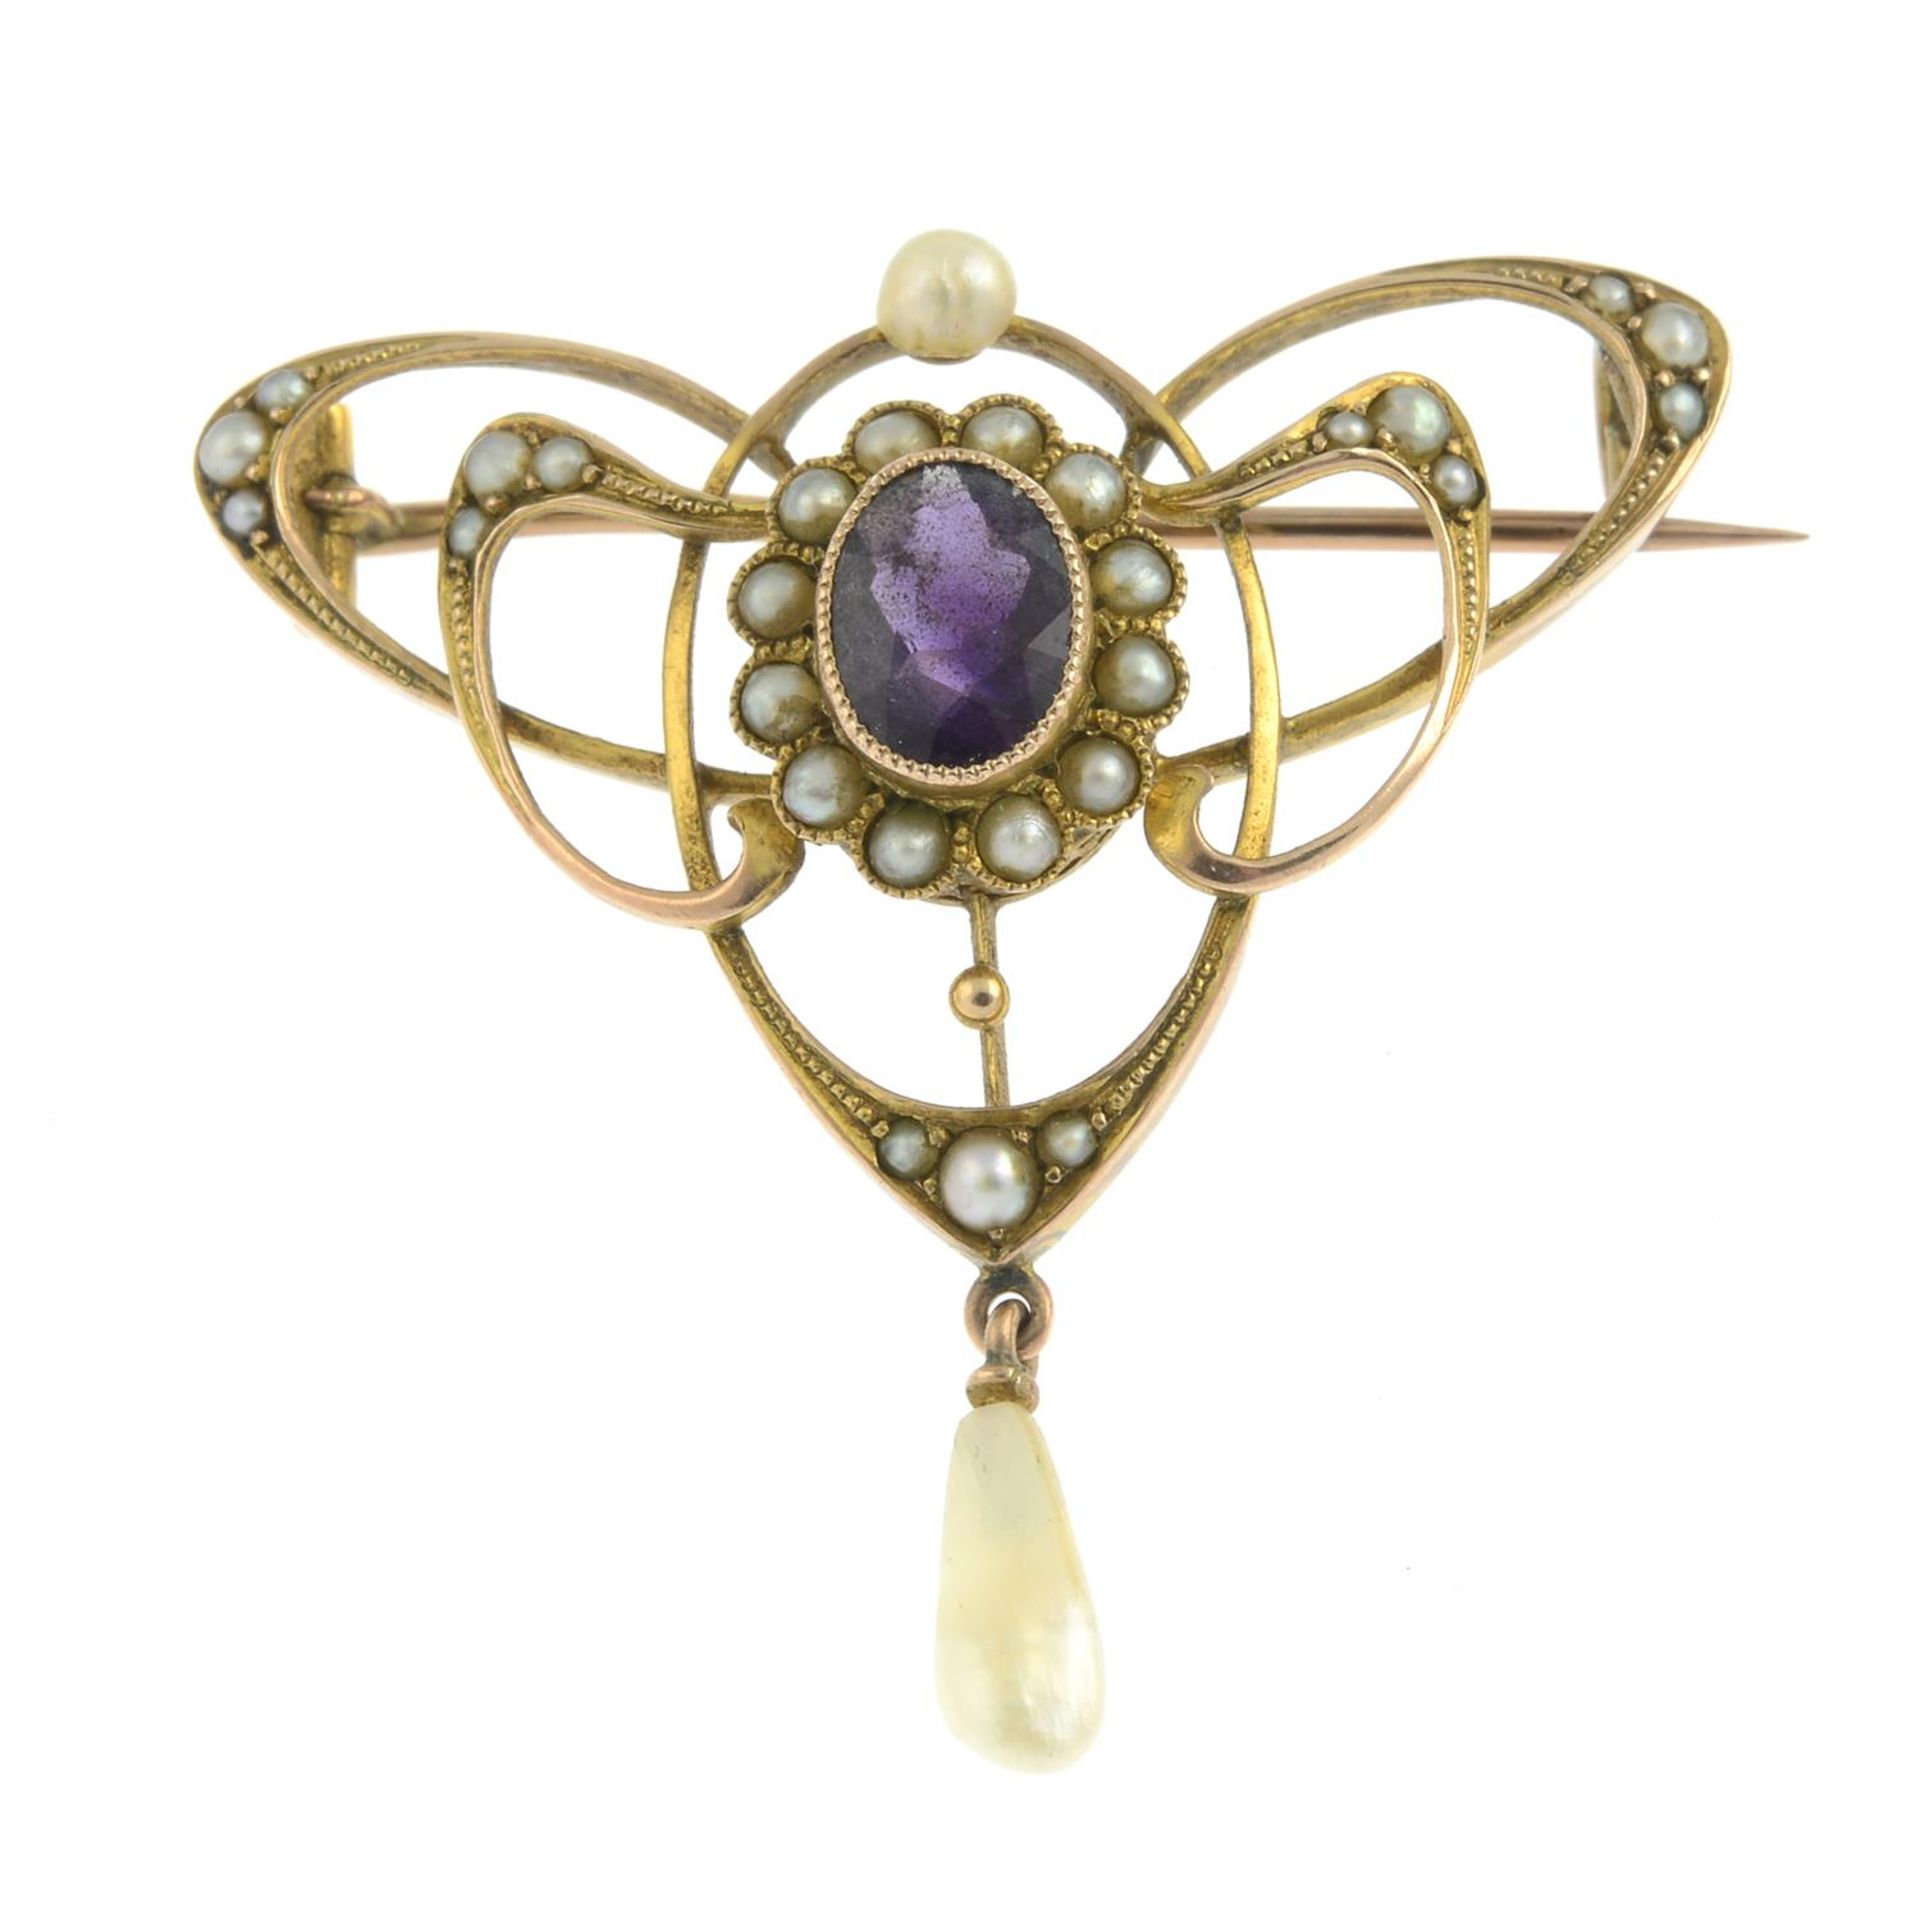 An Art Nouveau 9ct gold amethyst and split pearl brooch.